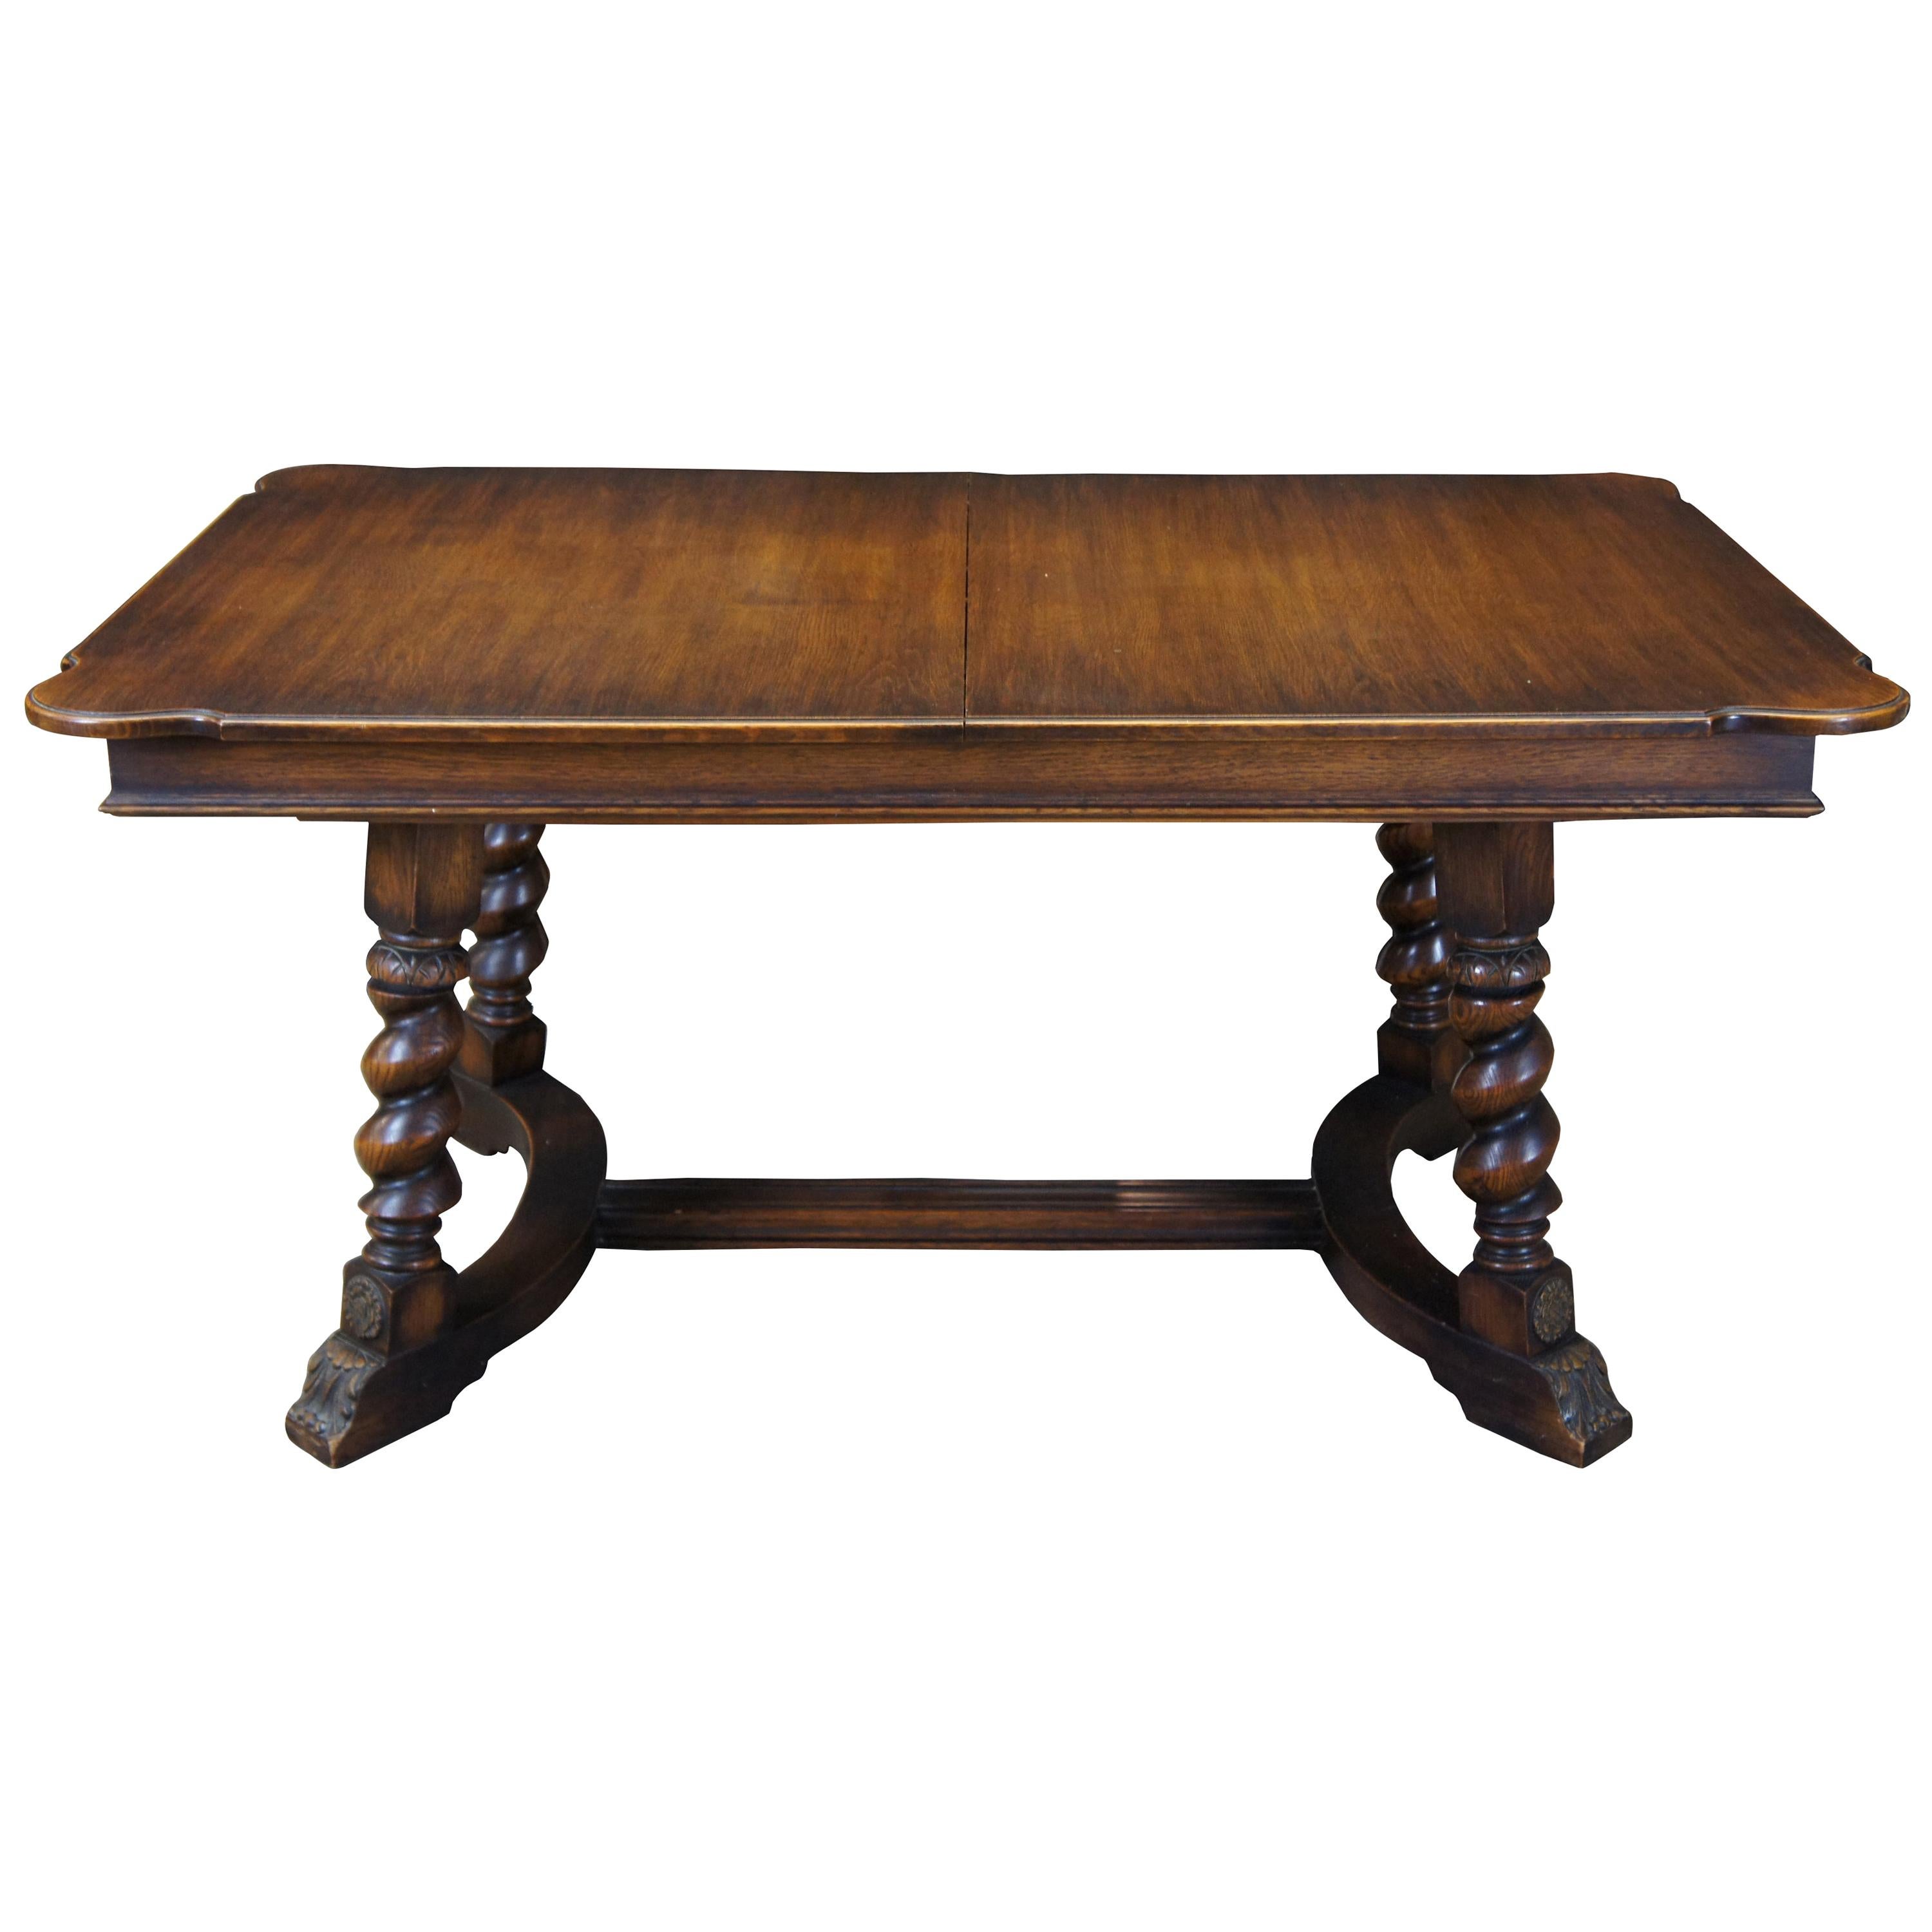 Antique Jacobean Revival Barley Twisted Dining Trestle Table